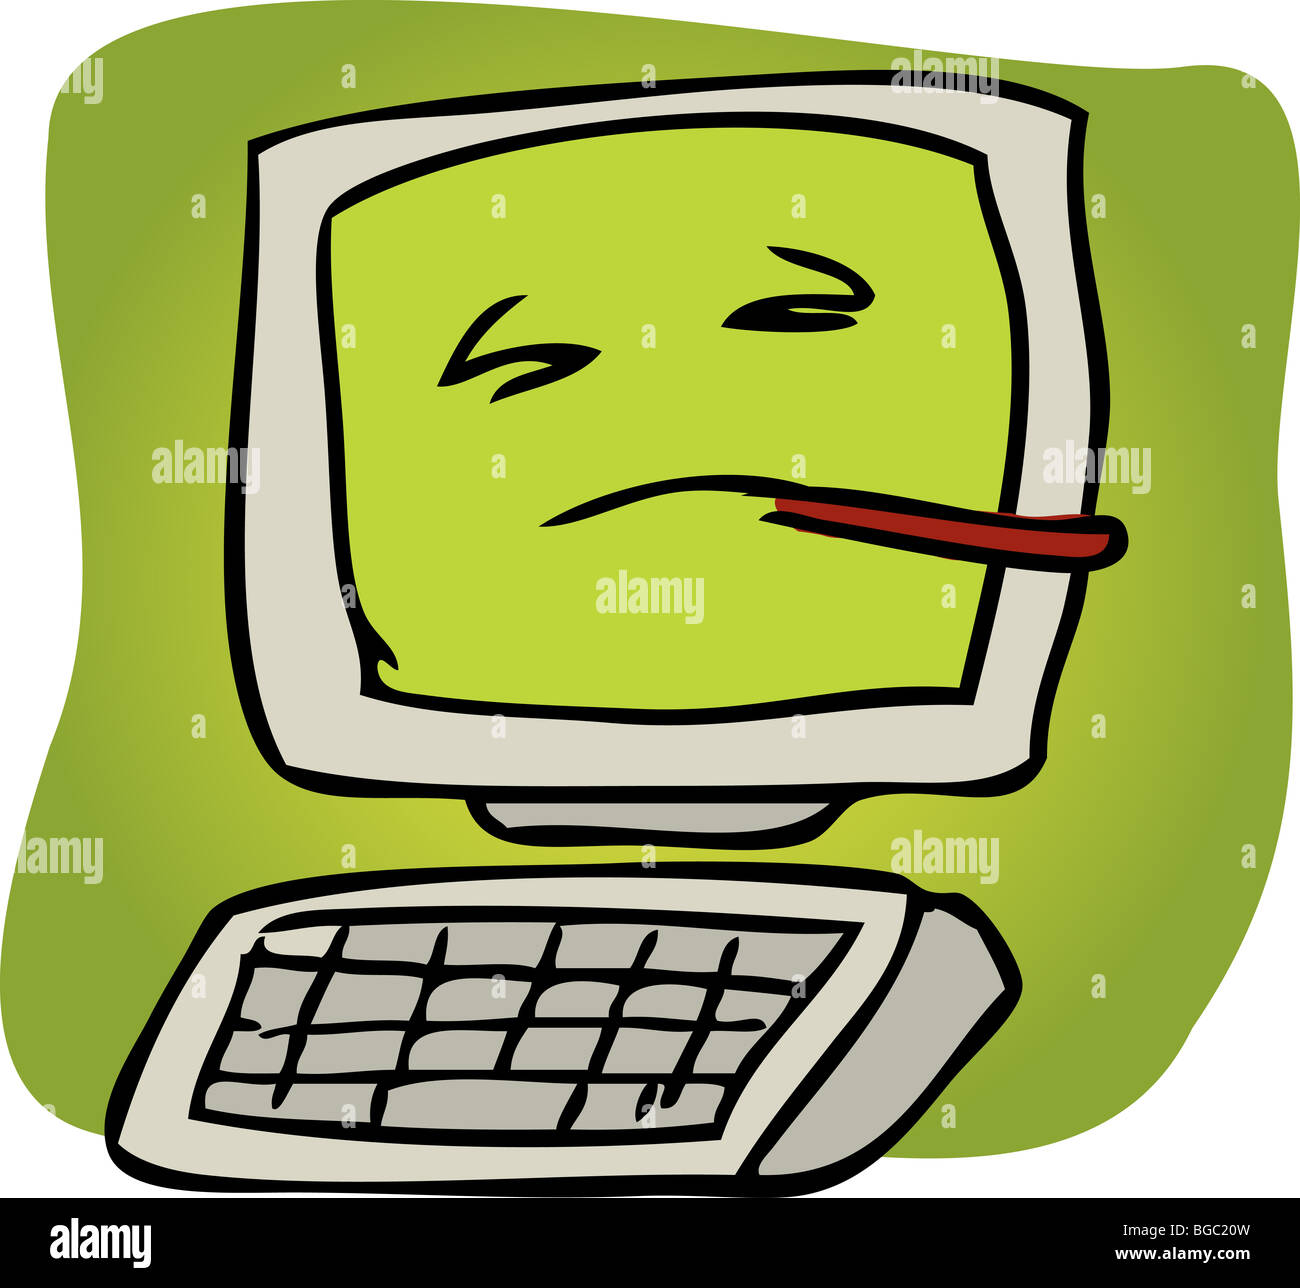 Cartoon illustration of a sick computer with thermometer Stock Photo